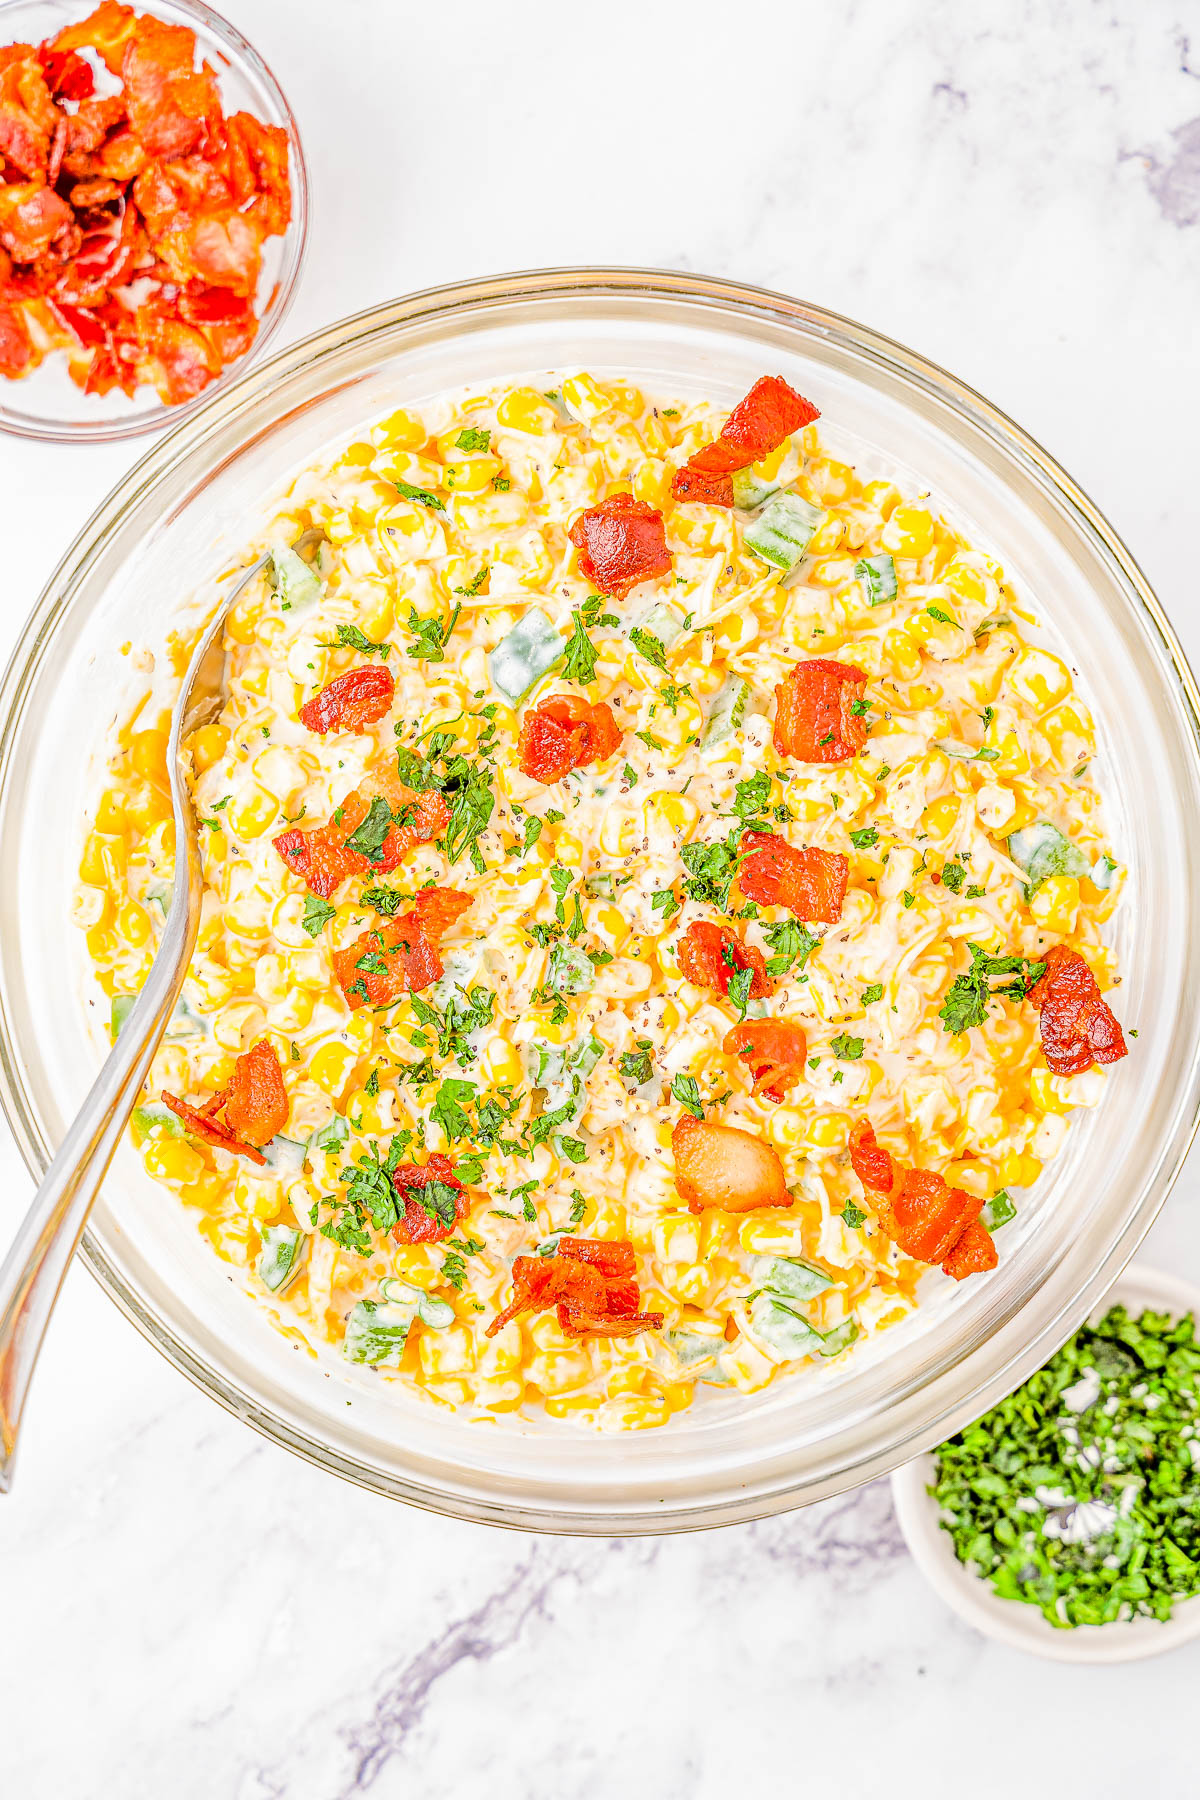 Creamy Corn and Bacon Salad - This EASY creamy corn salad with crispy bacon, jalapeño peppers and green onions for extra flavor, and plenty of shredded cheese will be a few FAVORITE side dish! Perfect for your next picnic, potluck, barbecue, or summer holiday like the 4th of July or Labor Day and it's ready in 15 minutes! 